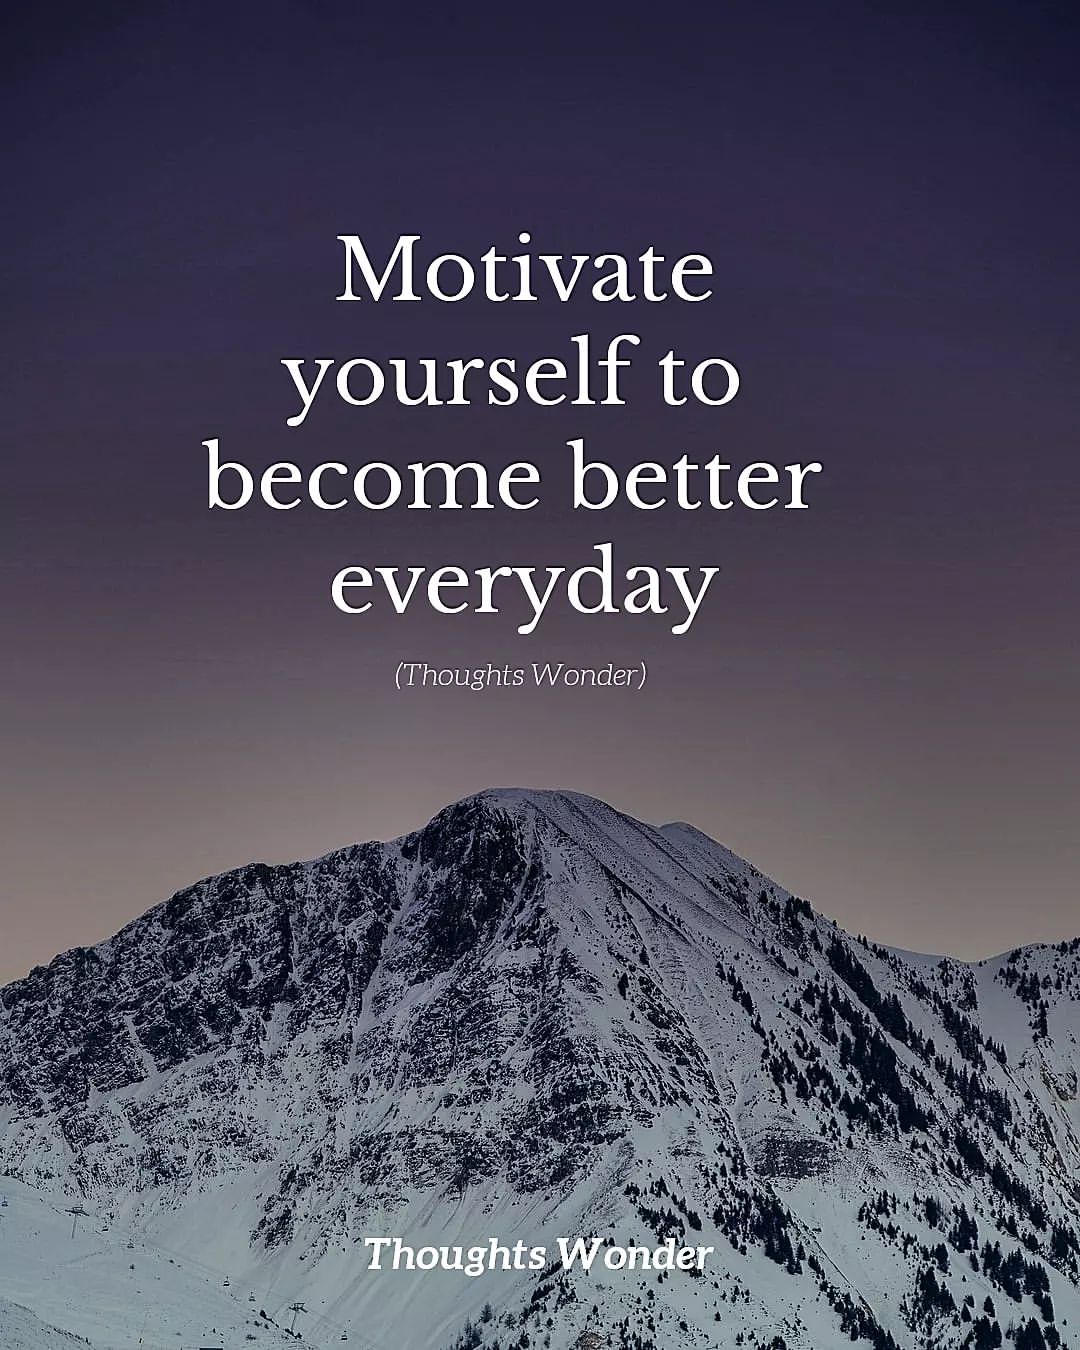 Motivate yourself to become better everyday.